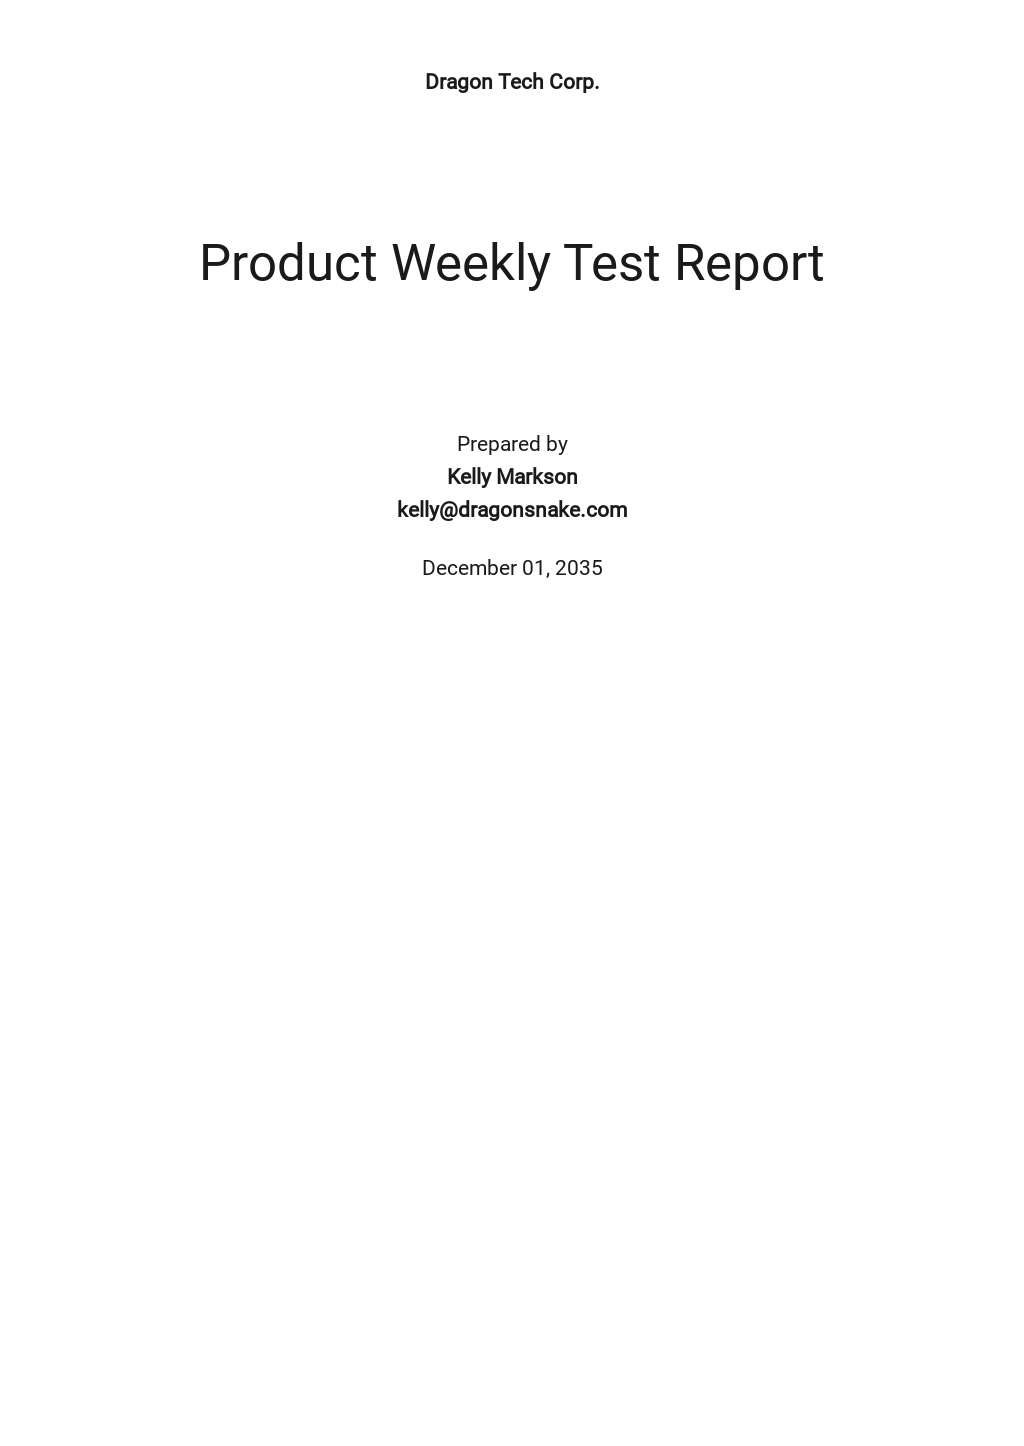 20+ IT/Software Report Templates - Free Downloads  Template.net Regarding Weekly Test Report Template